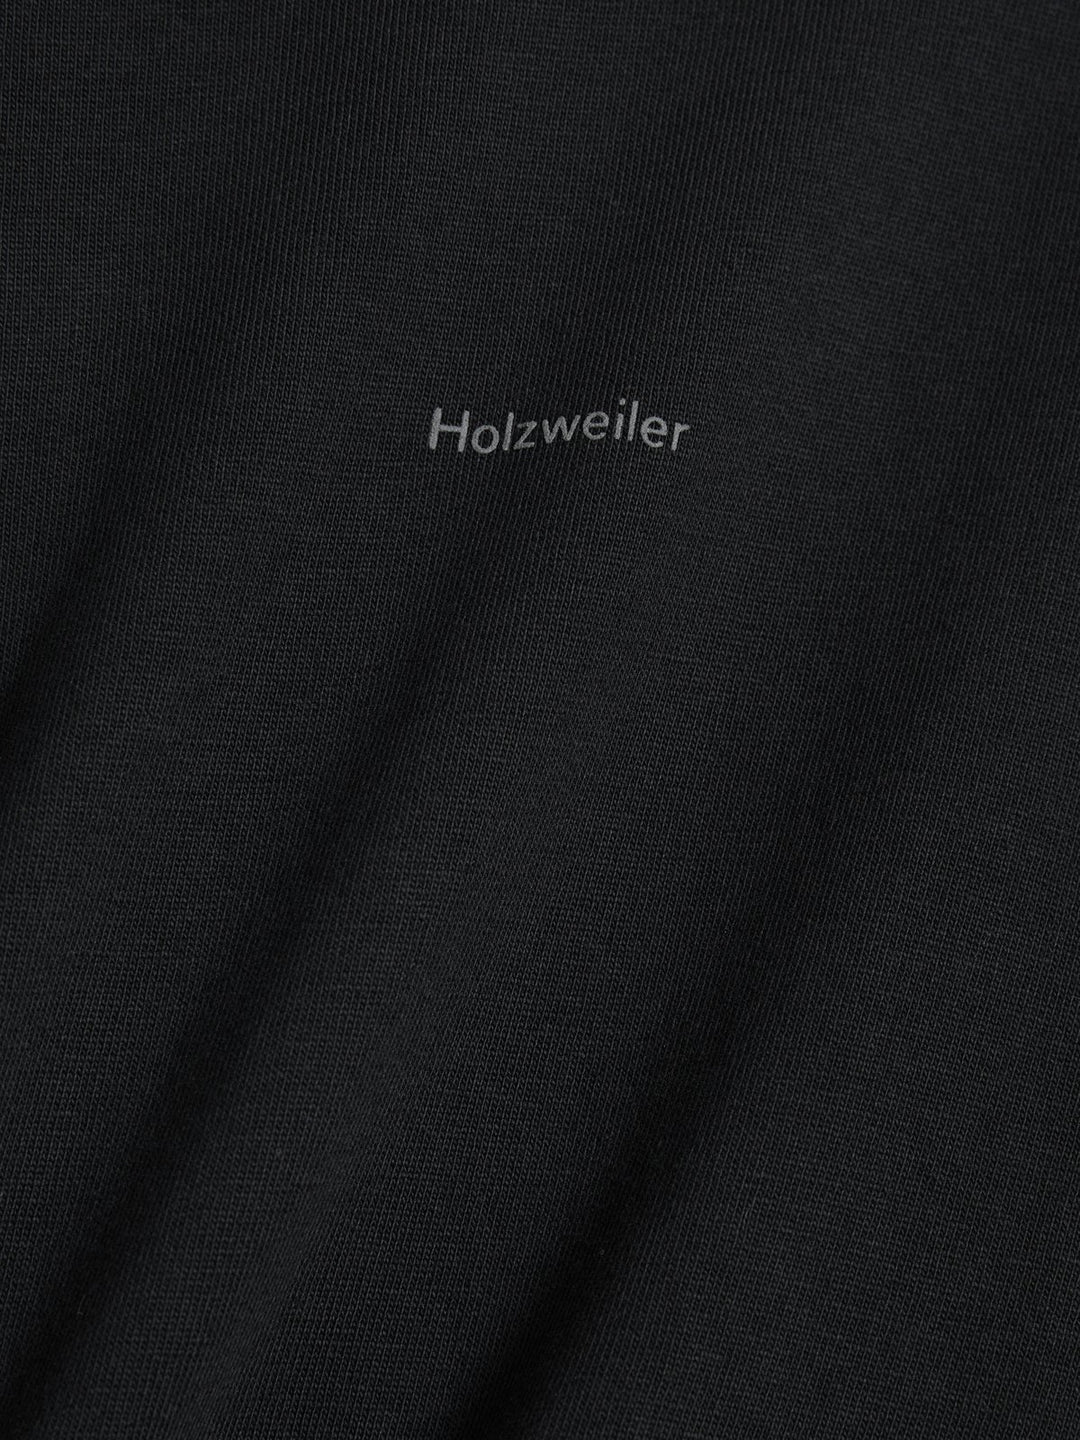 M. Relaxed Long Sleeve  Black